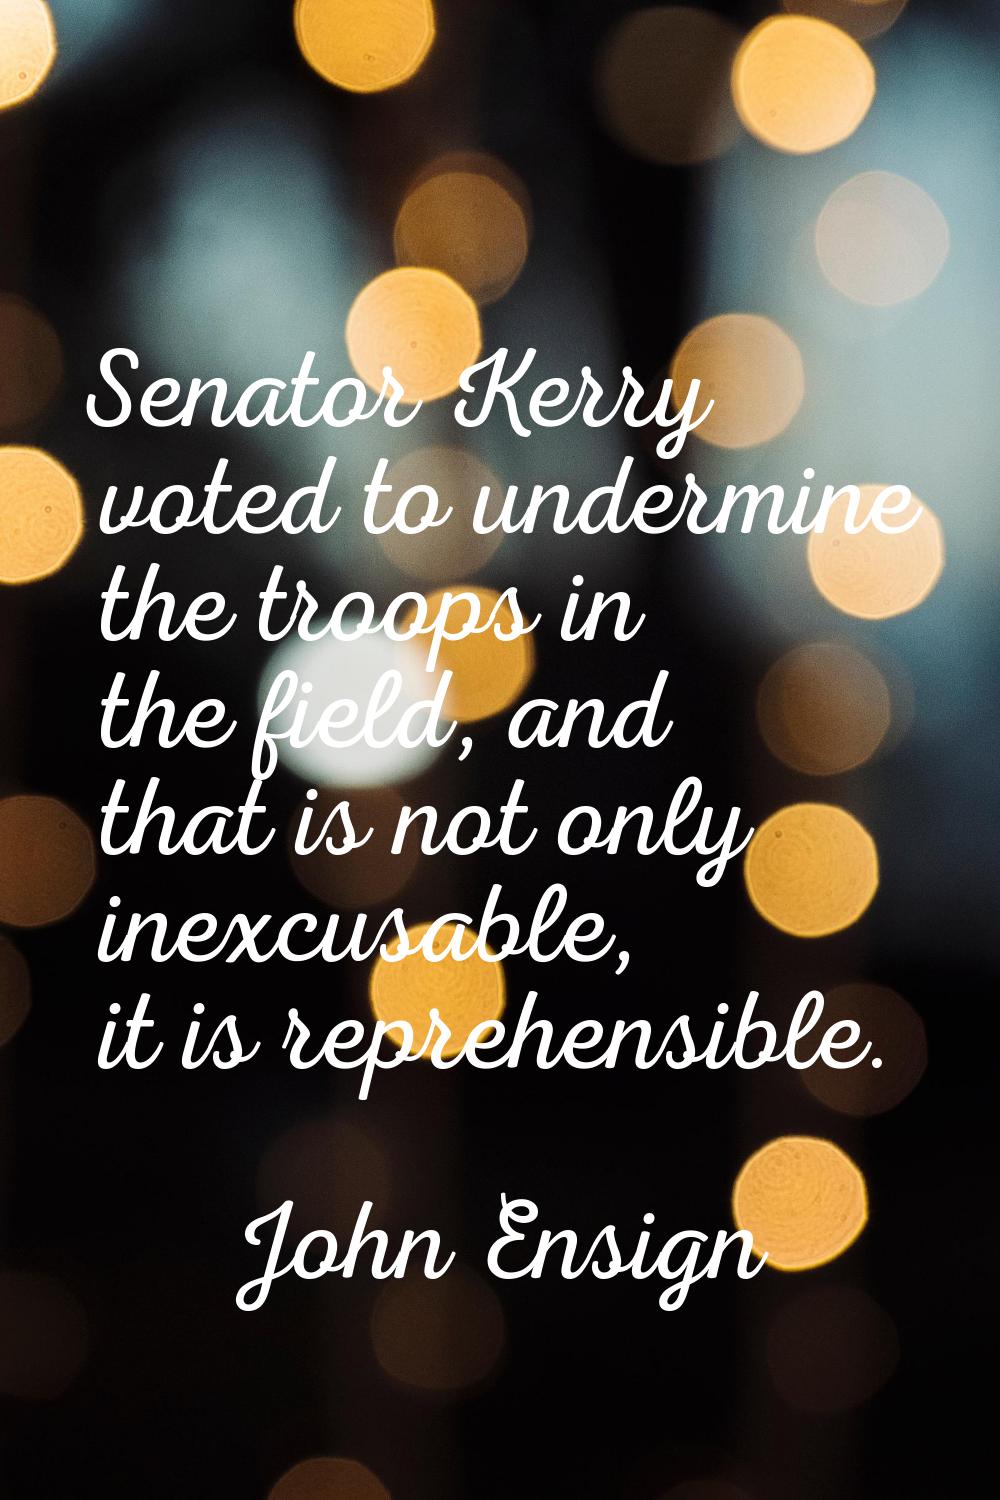 Senator Kerry voted to undermine the troops in the field, and that is not only inexcusable, it is r